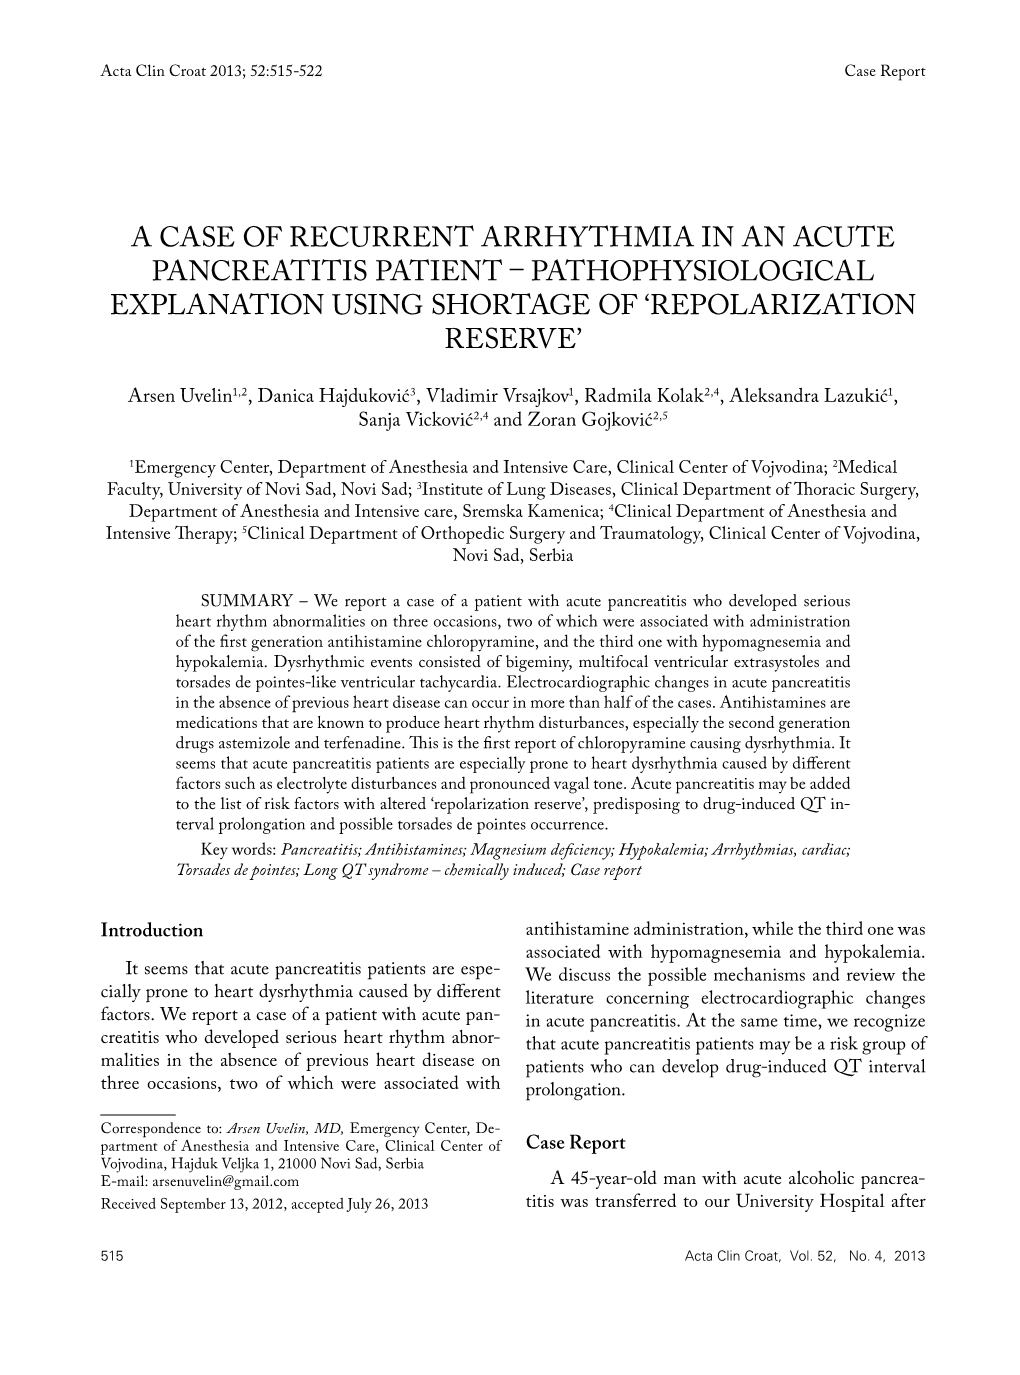 A Case of Recurrent Arrhythmia in an Acute Pancreatitis Patient – Pathophysiological Explanation Using Shortage of ‘Repolarization Reserve’